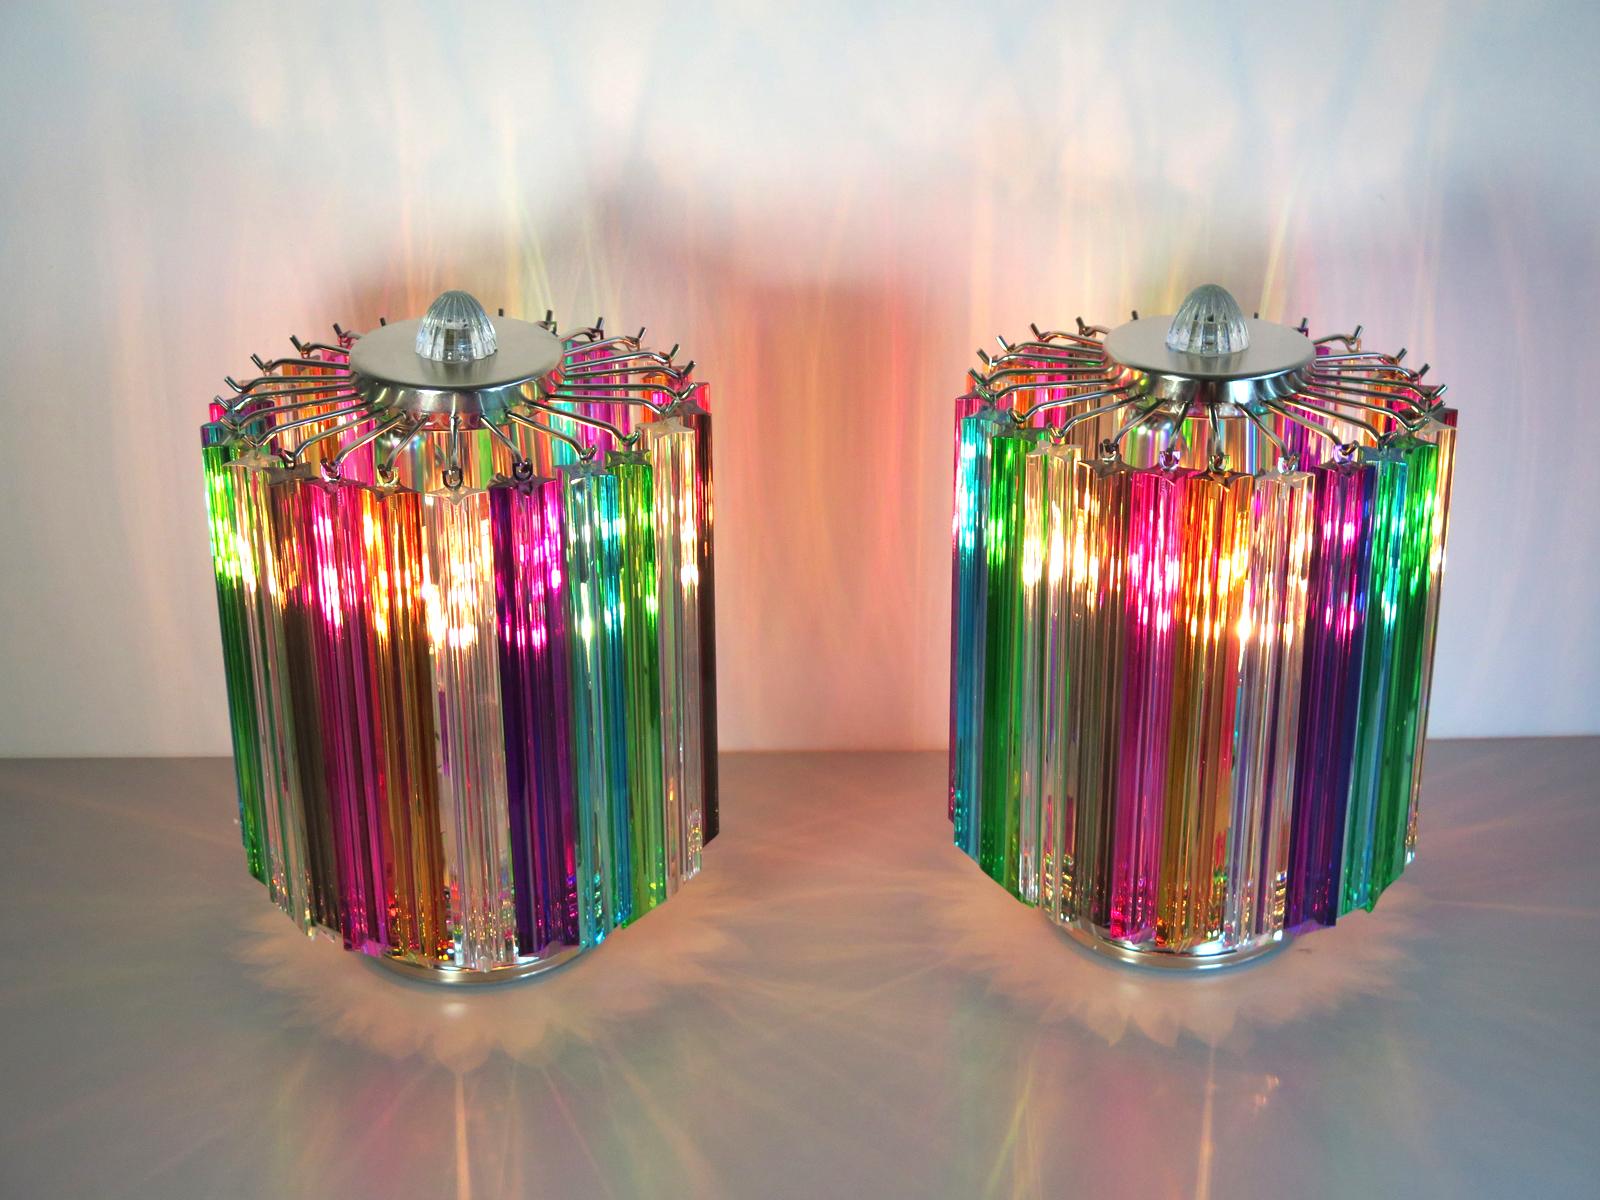 Magnificent pair of table lamps, 24 Quadriedri Murano crystal multicolored prism for each lamp. Nickel metal frame. Elegant object of furniture.
Period: Late 20th century
Dimensions: 15 inches (38 cm) height, 10.50 inches (27 cm)